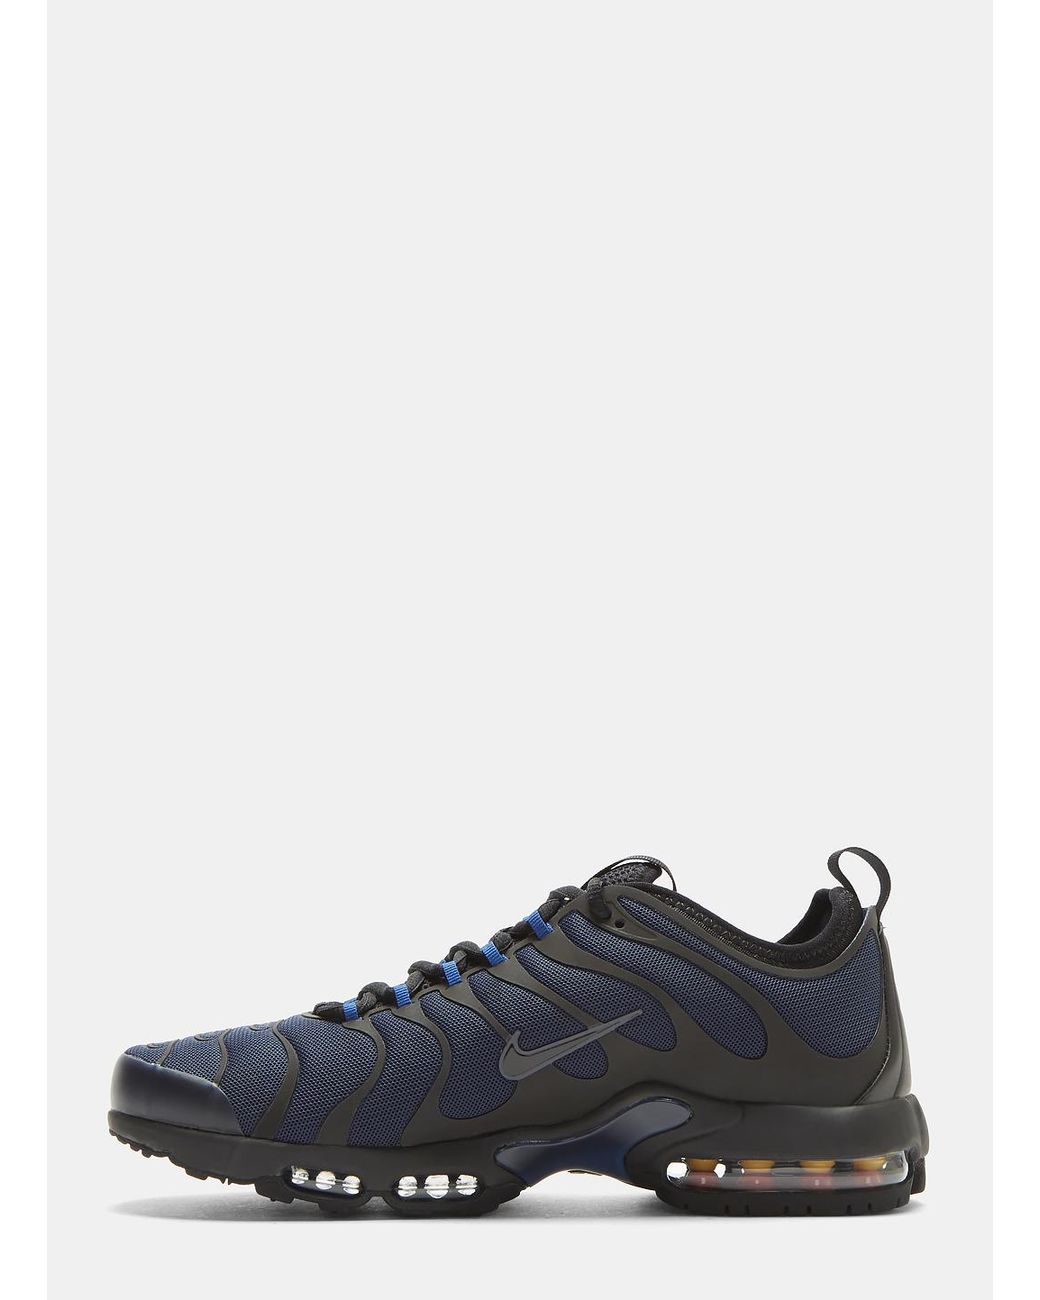 Nike Air Max Plus Tn Ultra Sneakers In Black And Navy for Men | Lyst Canada